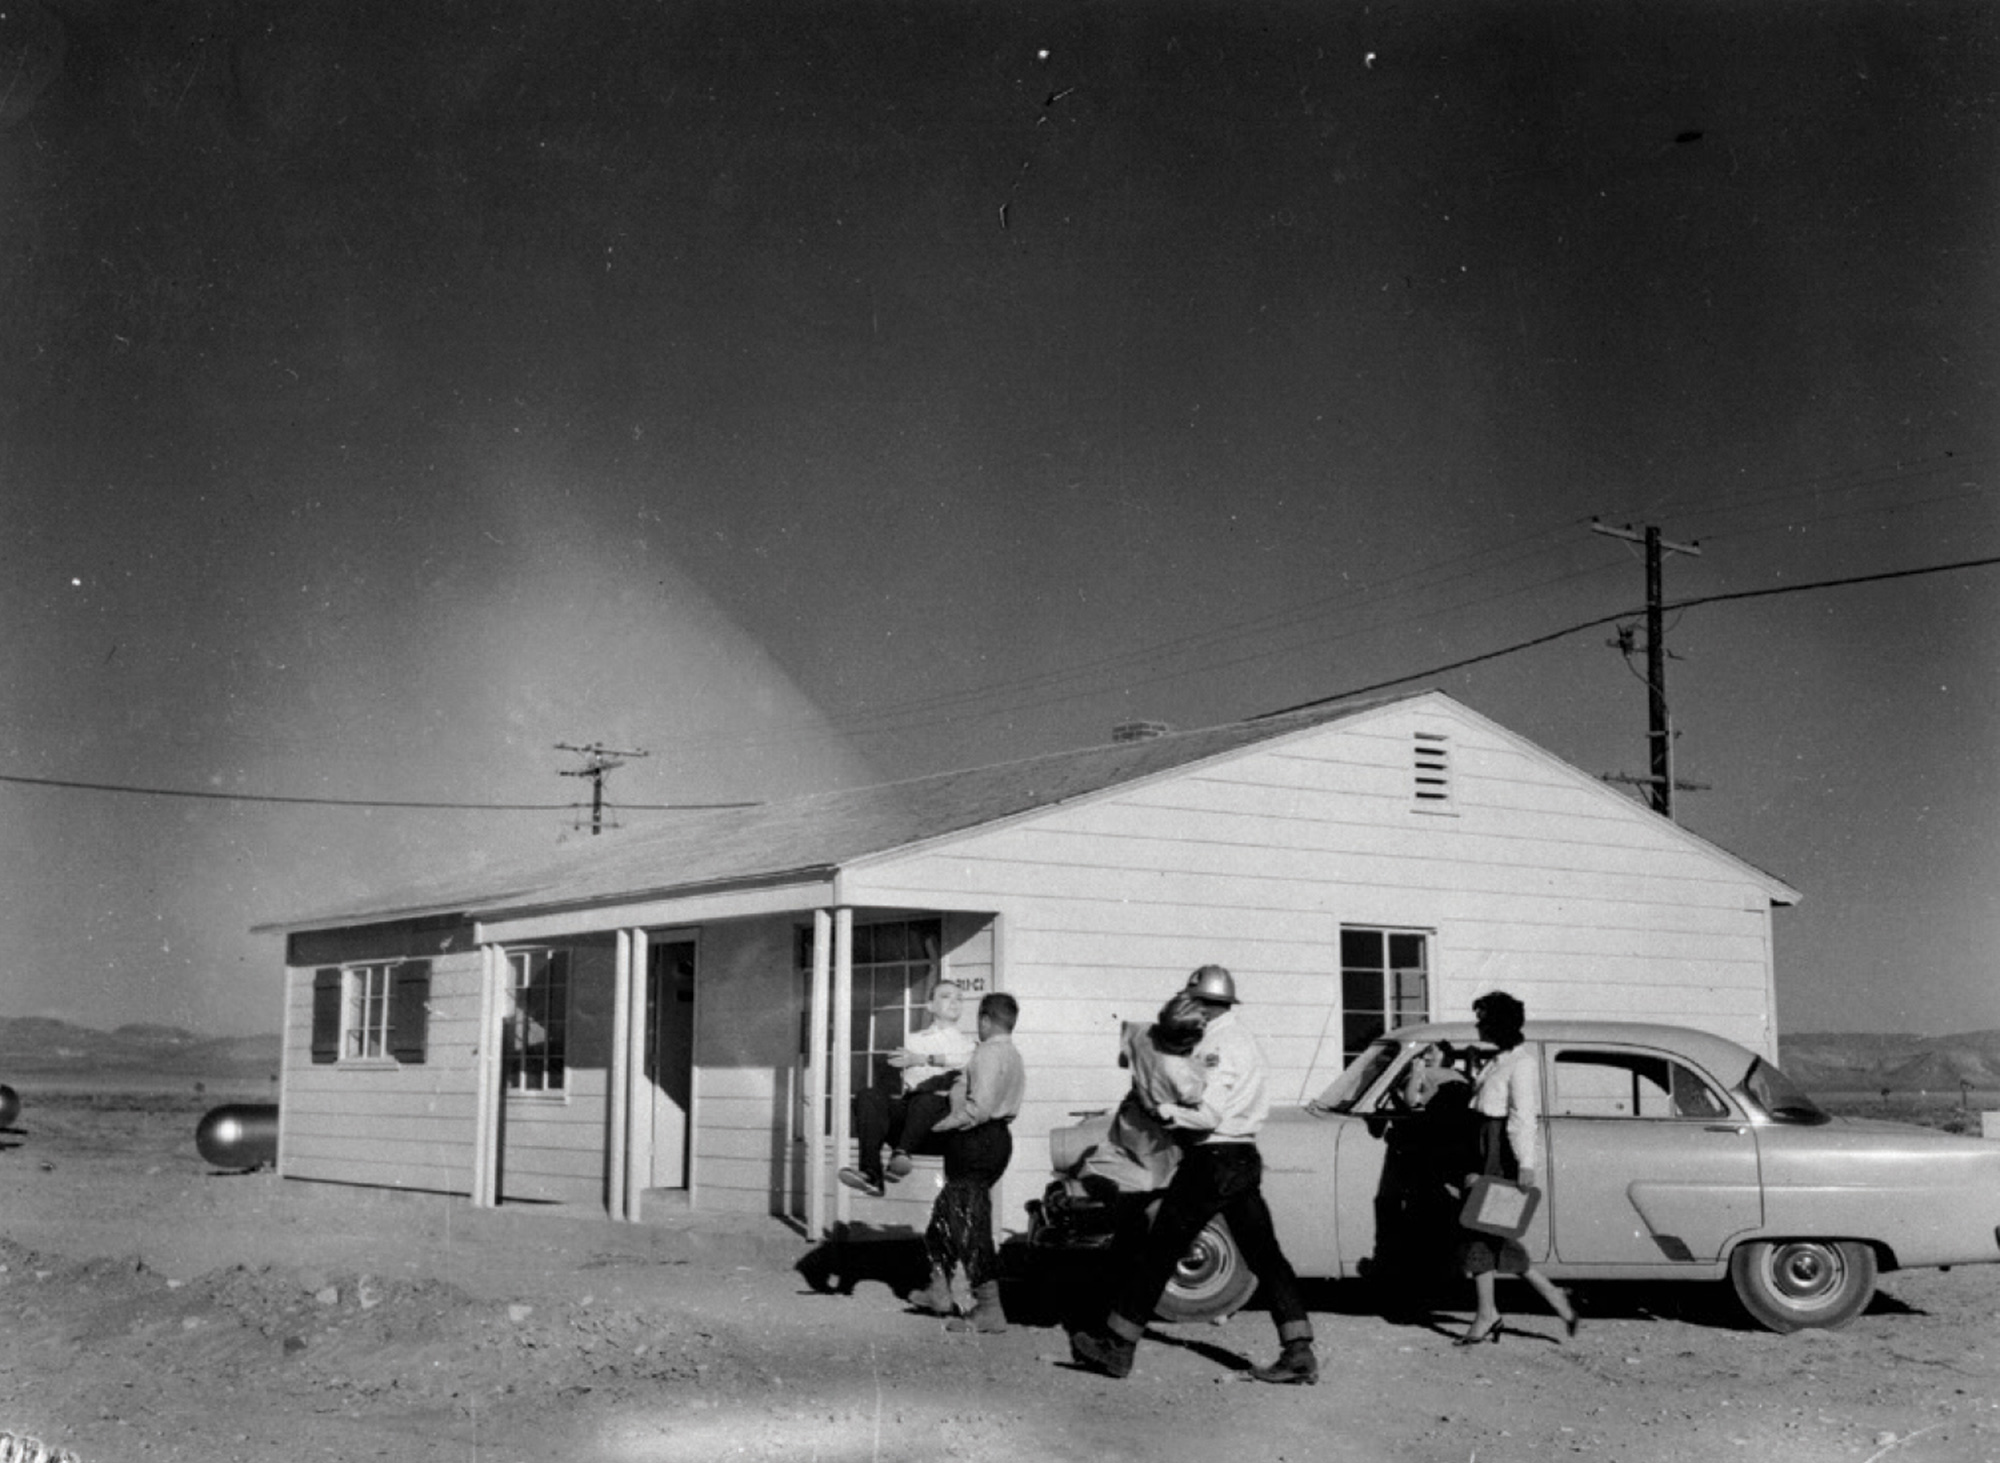 A photograph from Operation Cue depicting a group of test dummies being transported to a house.